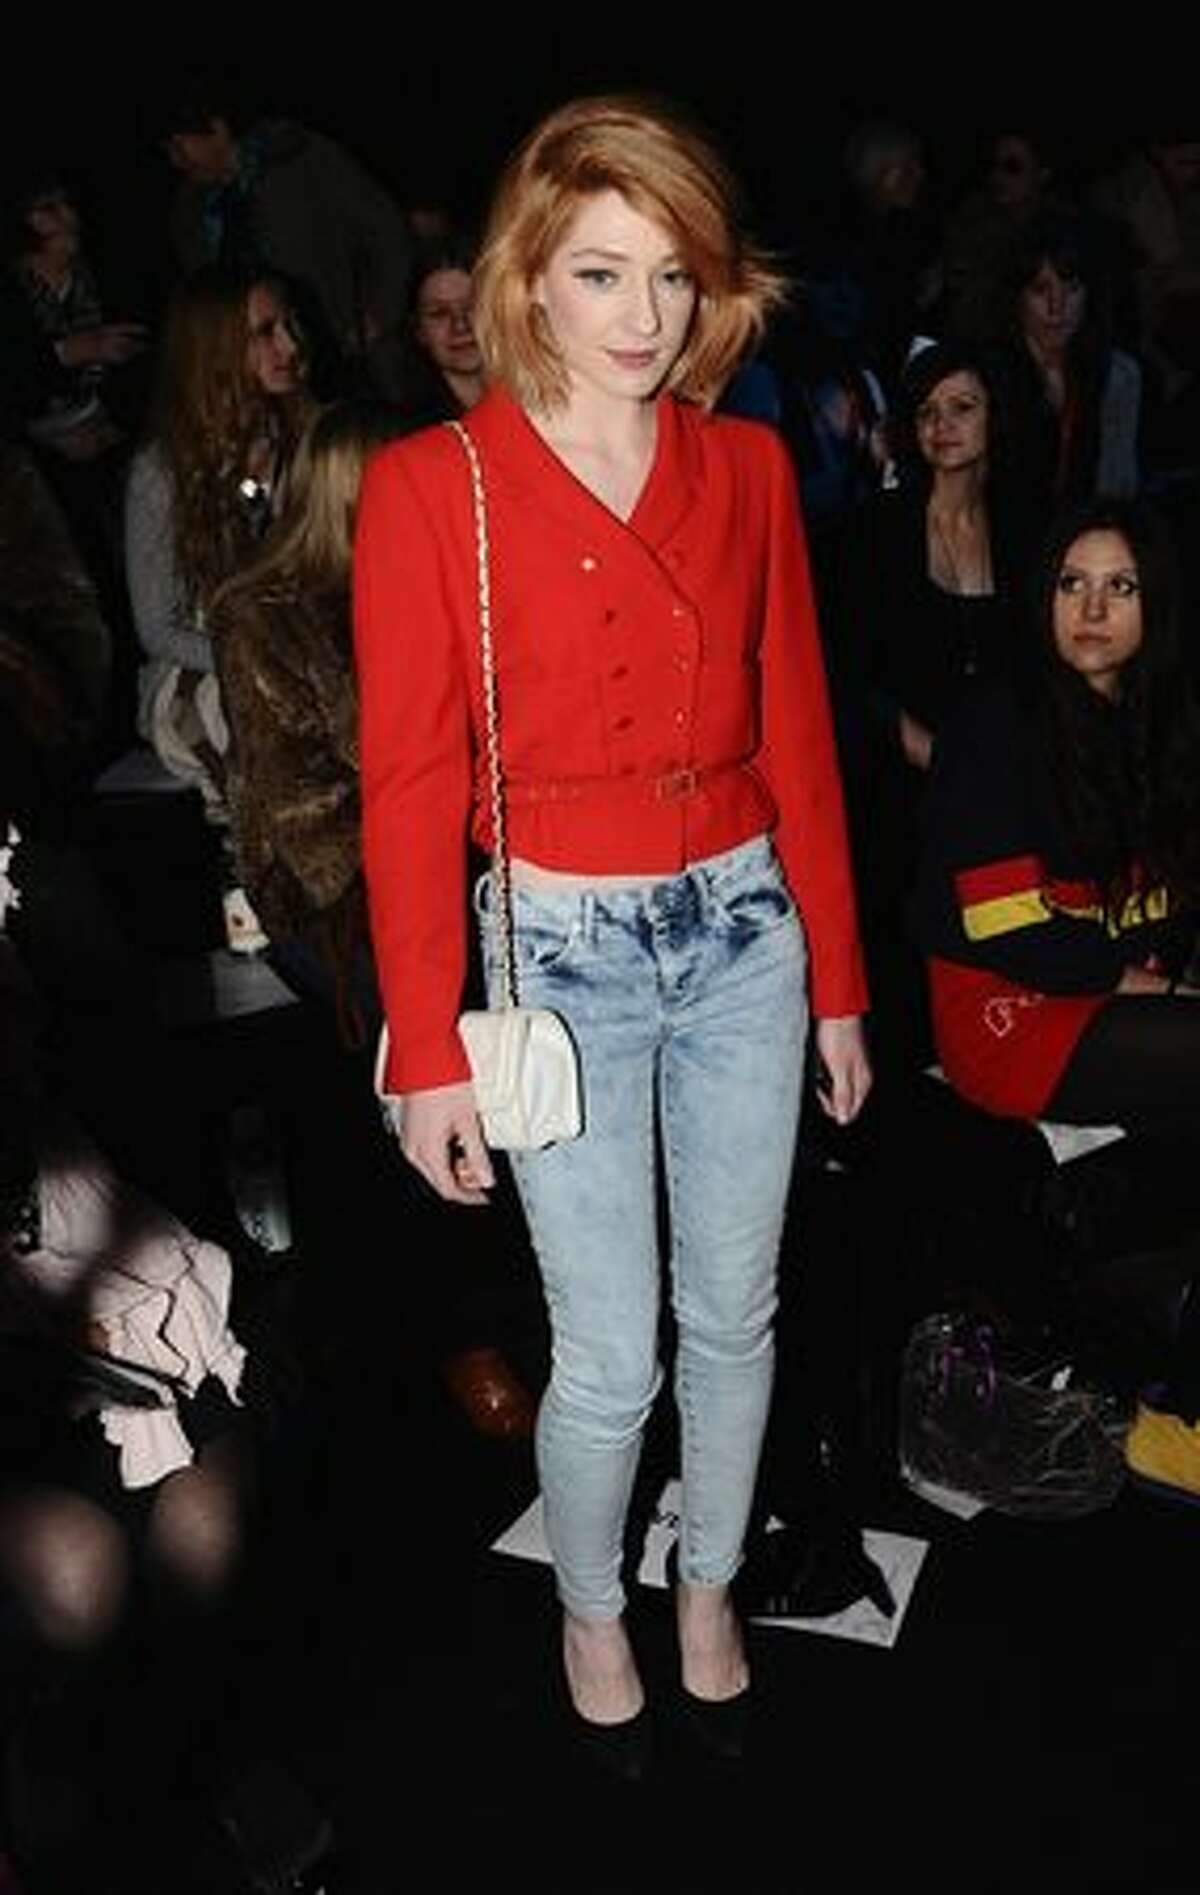 Nicola Roberts attends the Jena.Theo Fashion Show as part of London Fashion Week at Somerset House in London, England.